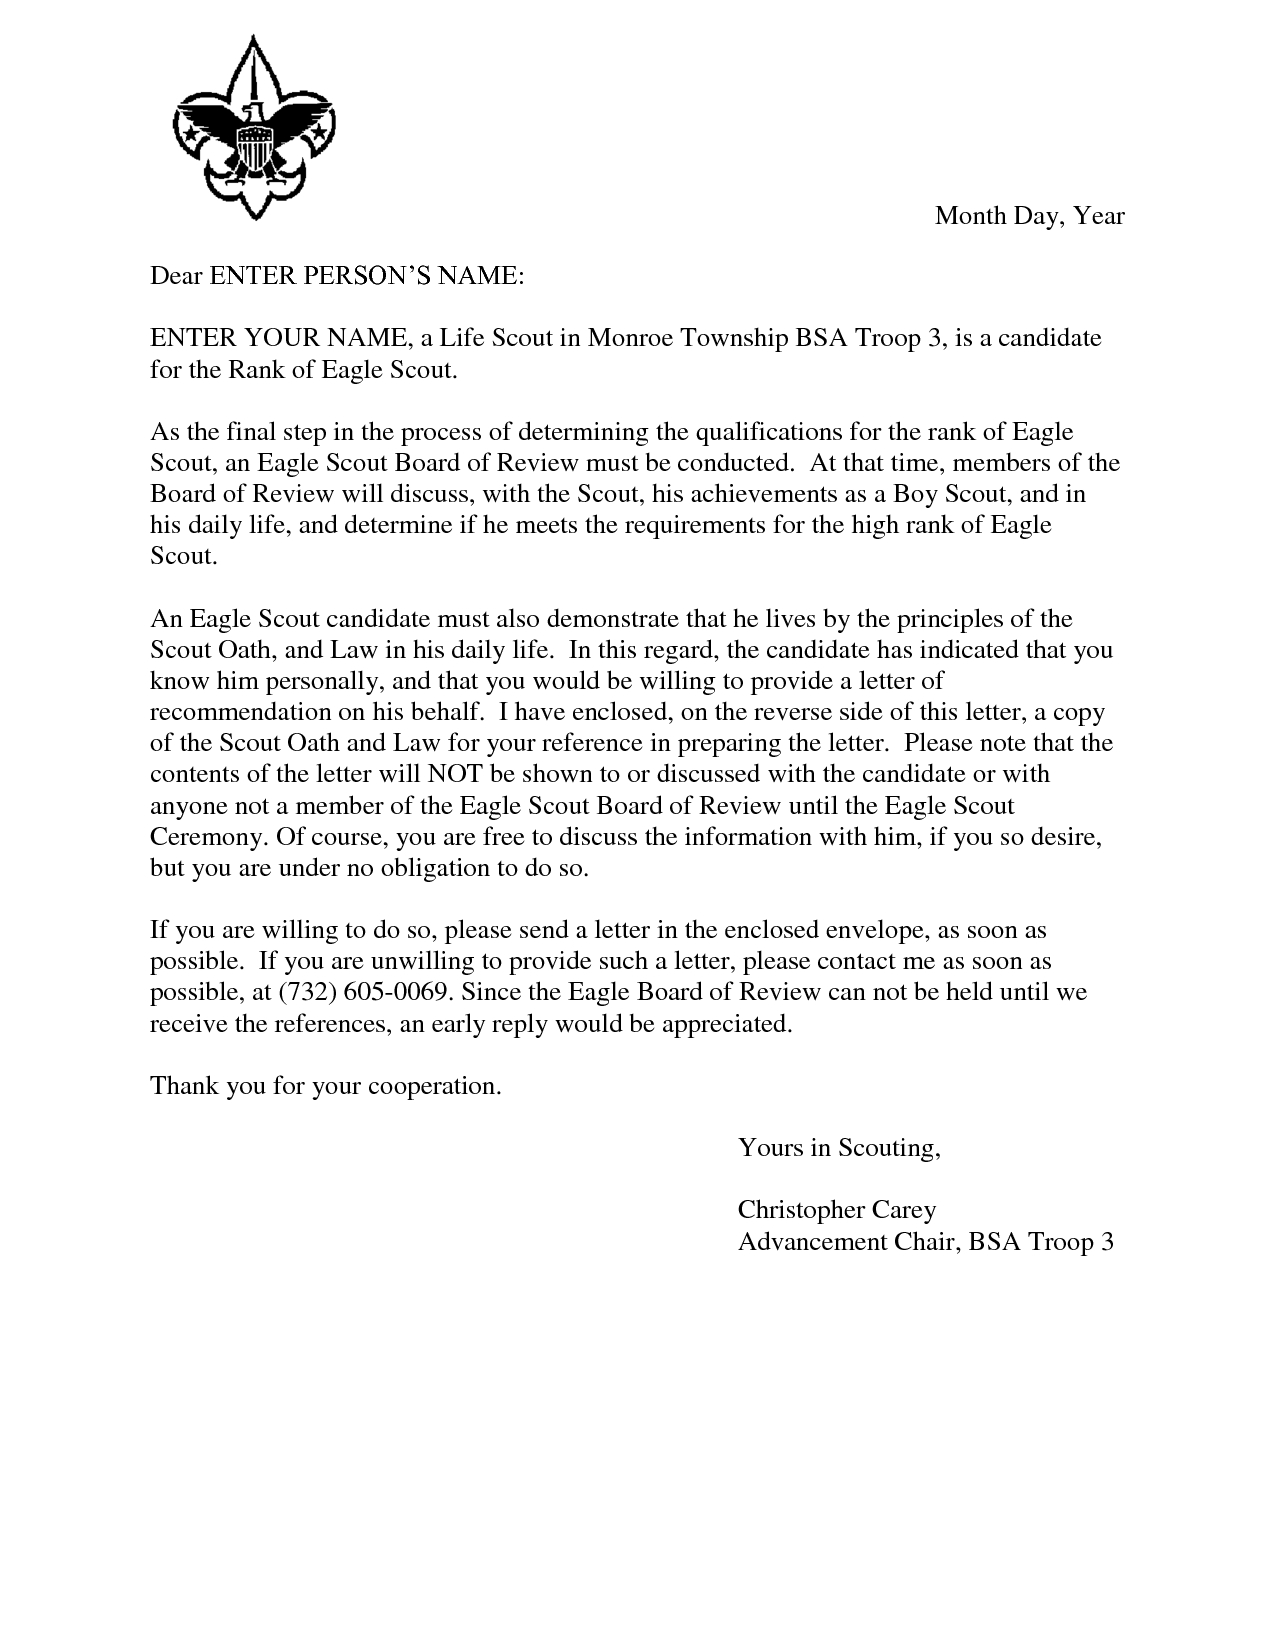 Sample Letter Of Recommendation Template Free - Eagle Scout Reference Request Sample Letter Doc 7 by Hfr990q